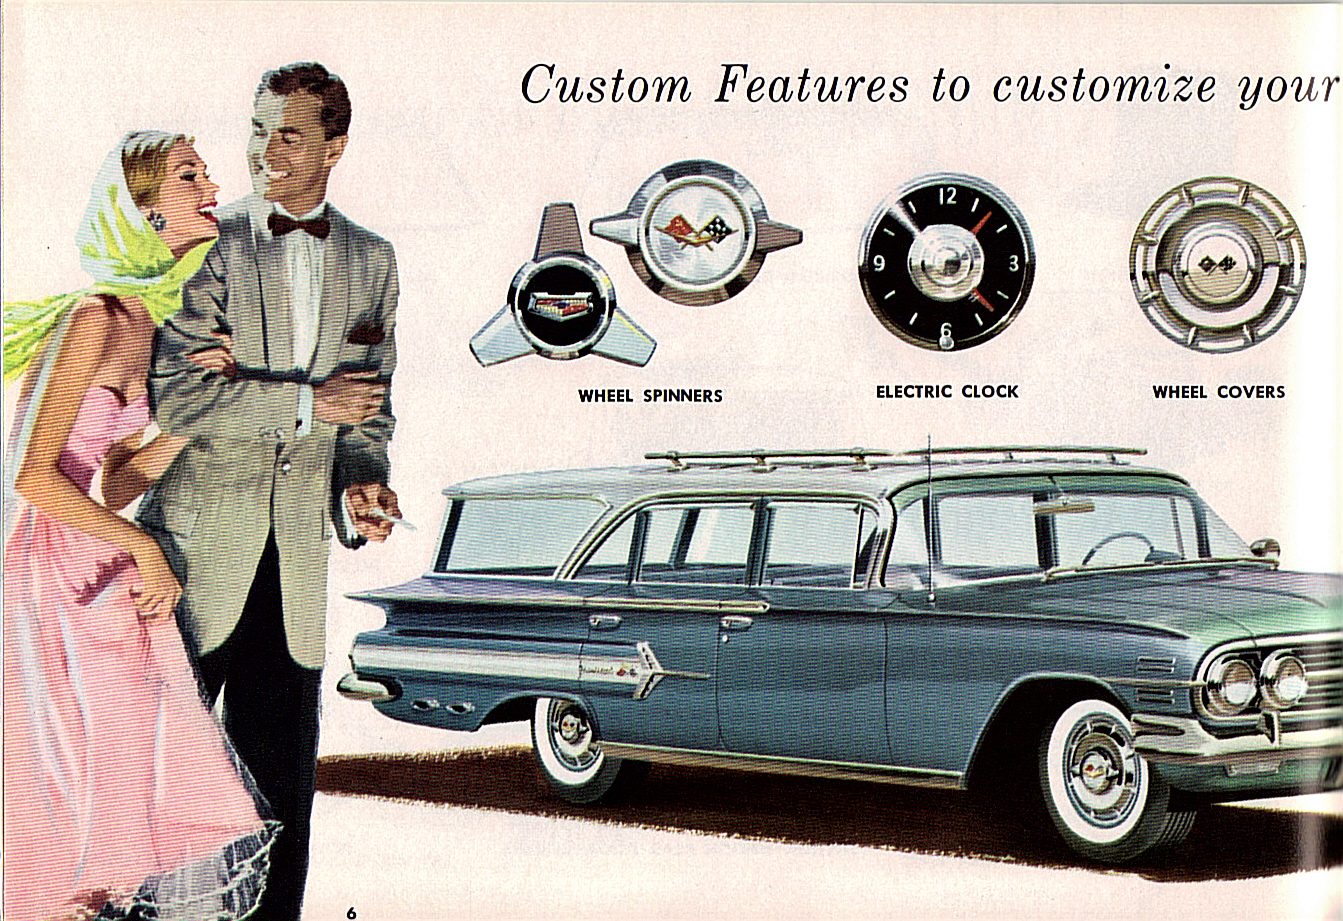 1960 Chevrolet Custom Features Brochure Page 12